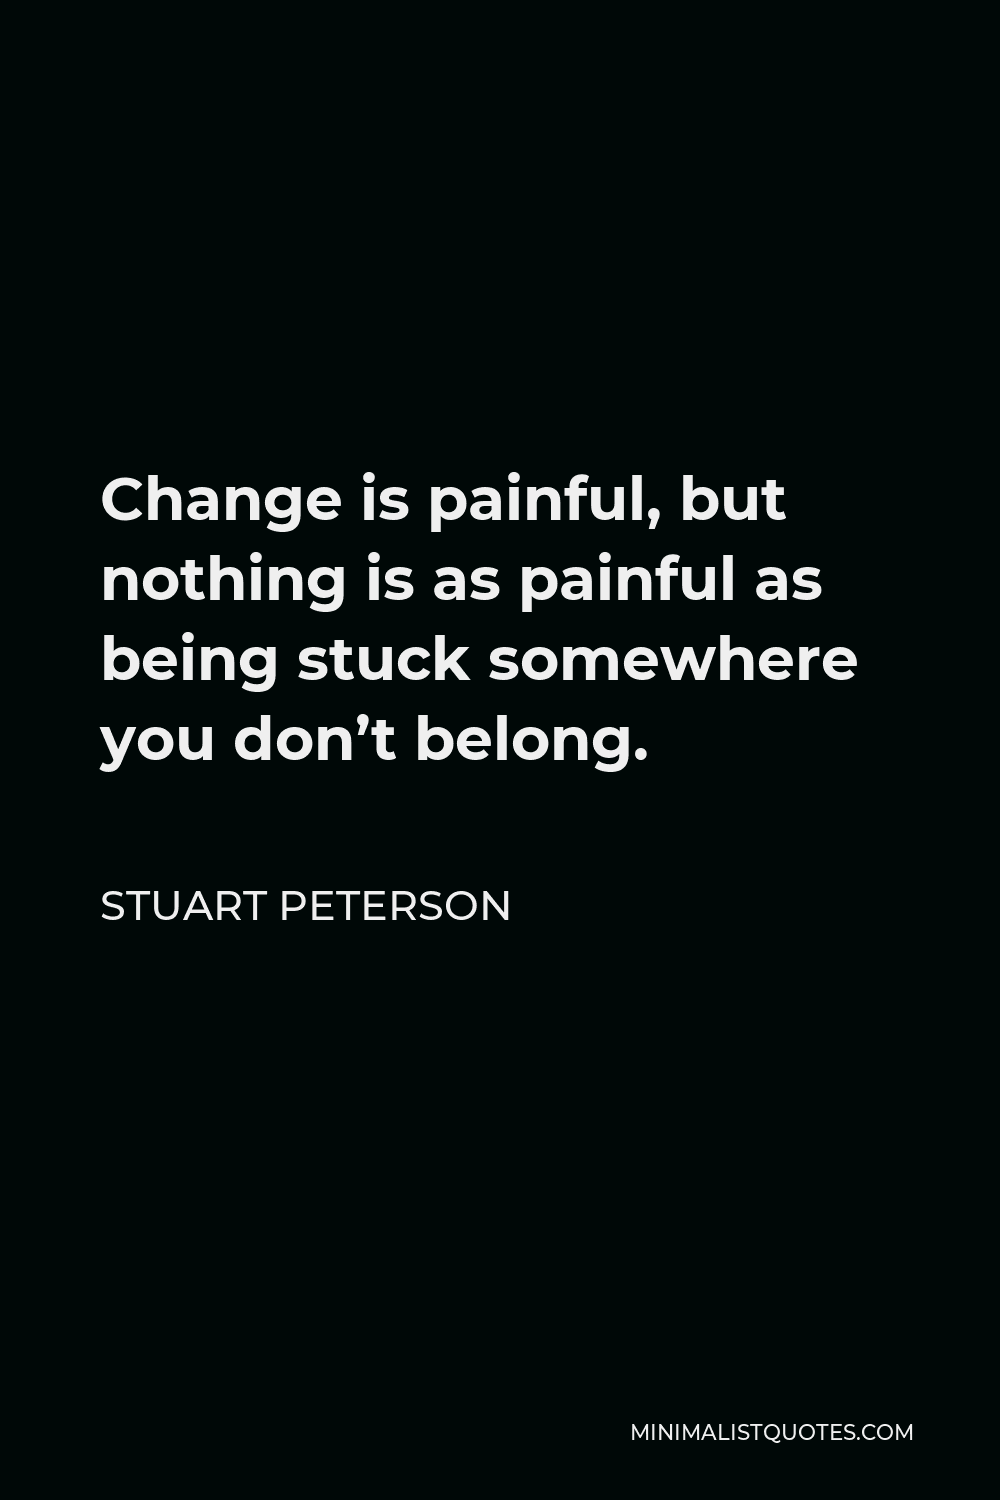 Stuart Peterson Quote - Change is painful, but nothing is as painful as being stuck somewhere you don’t belong.